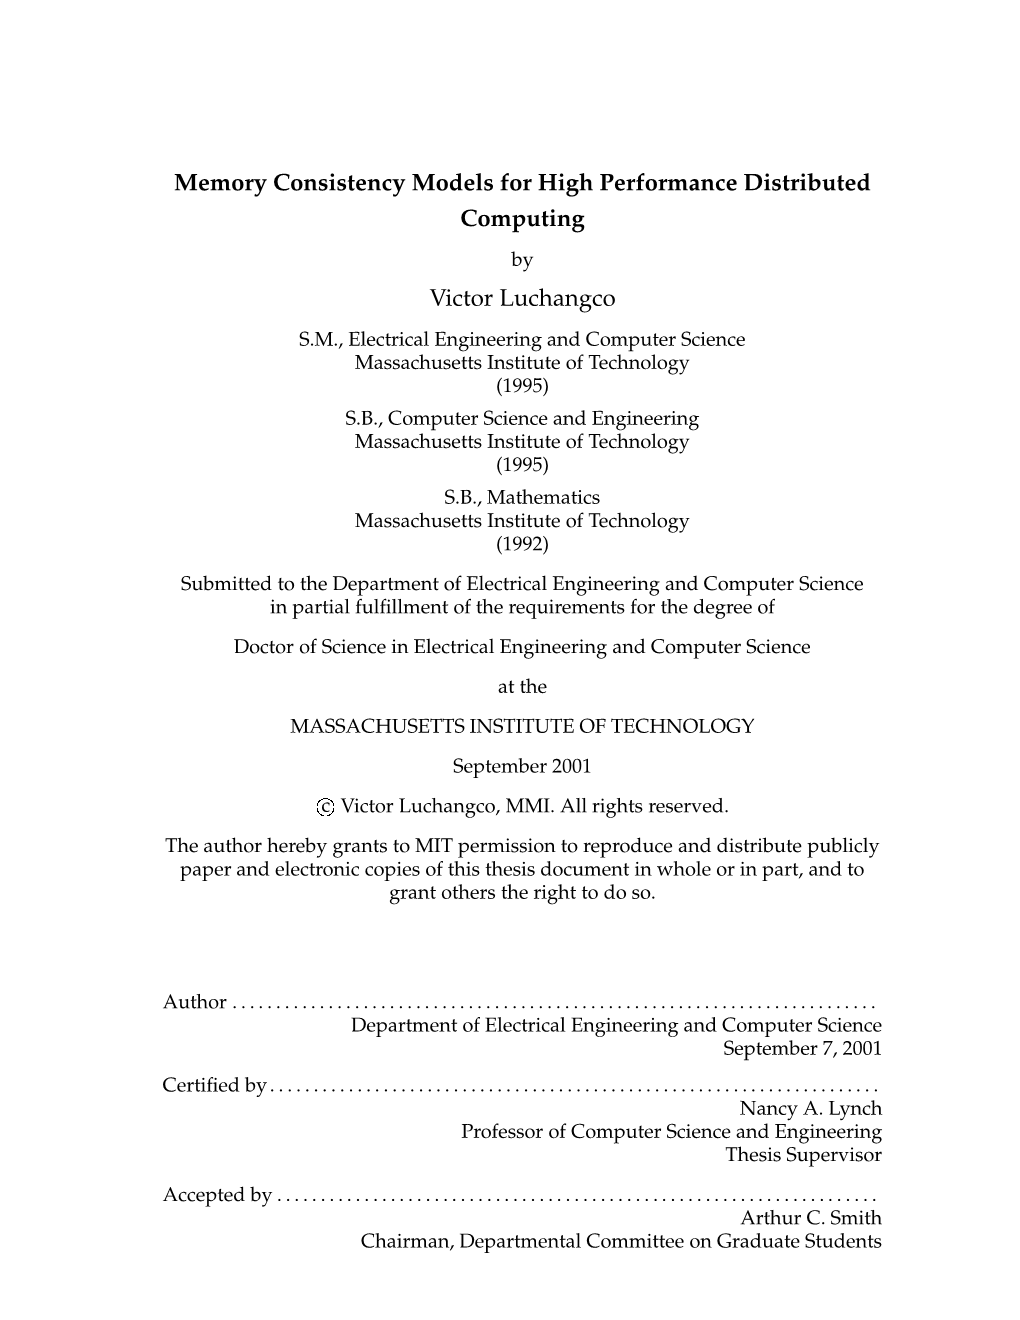 Memory Consistency Models for High Performance Distributed Computing